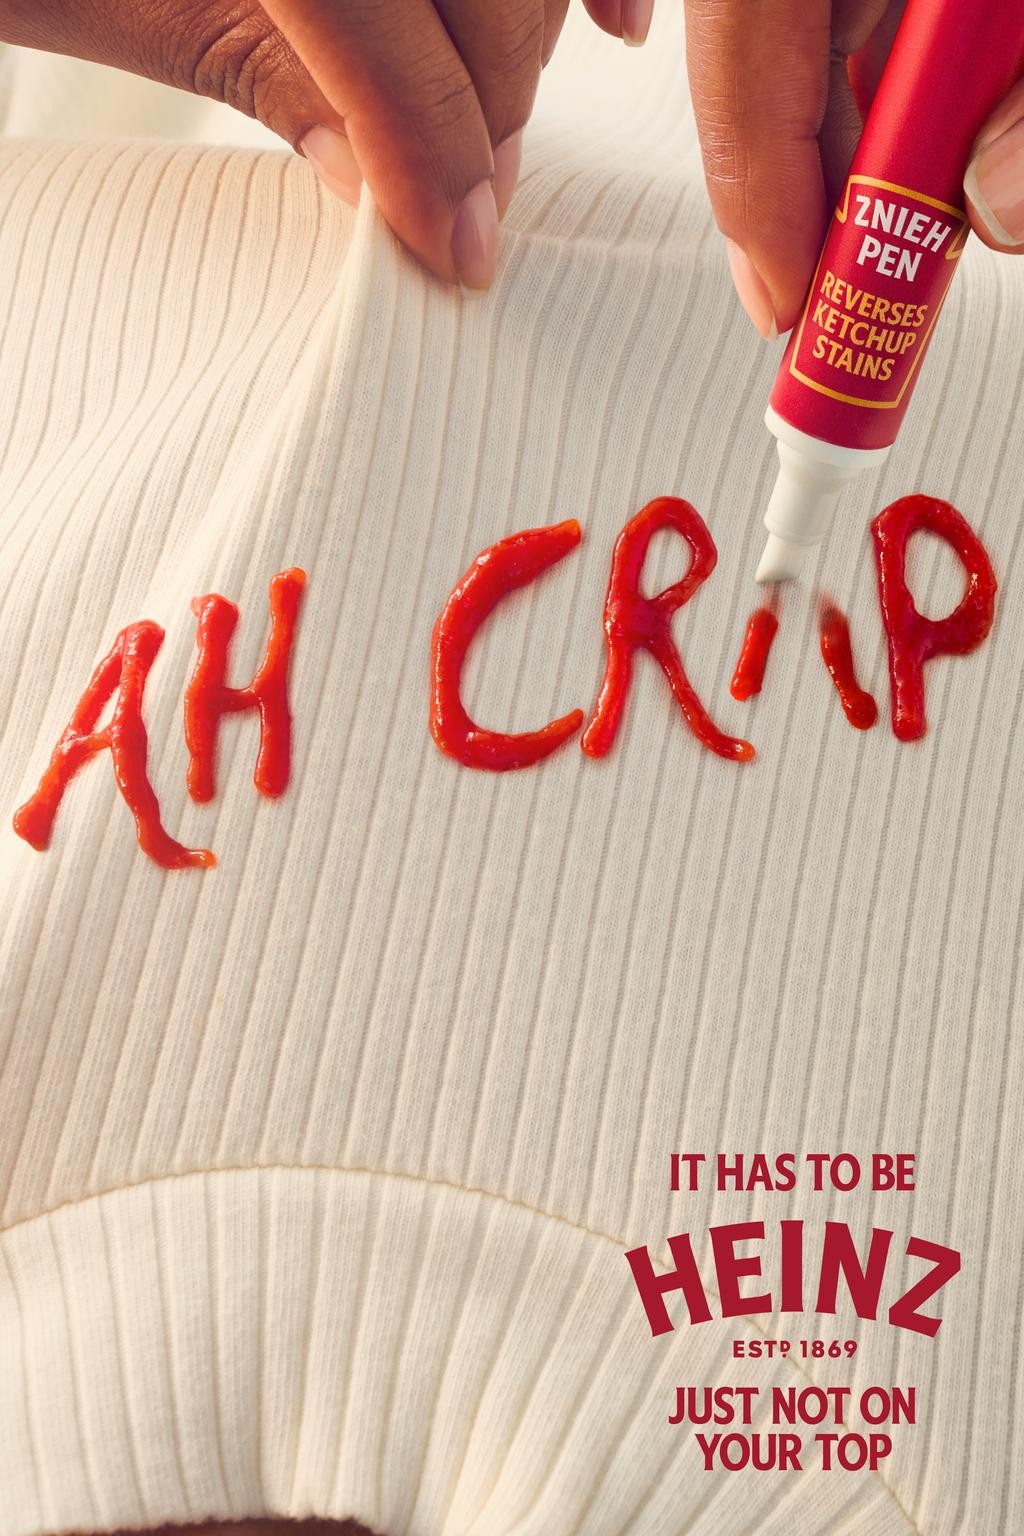 Zneih Pen. Reverses Heinz Ketchup Stains.